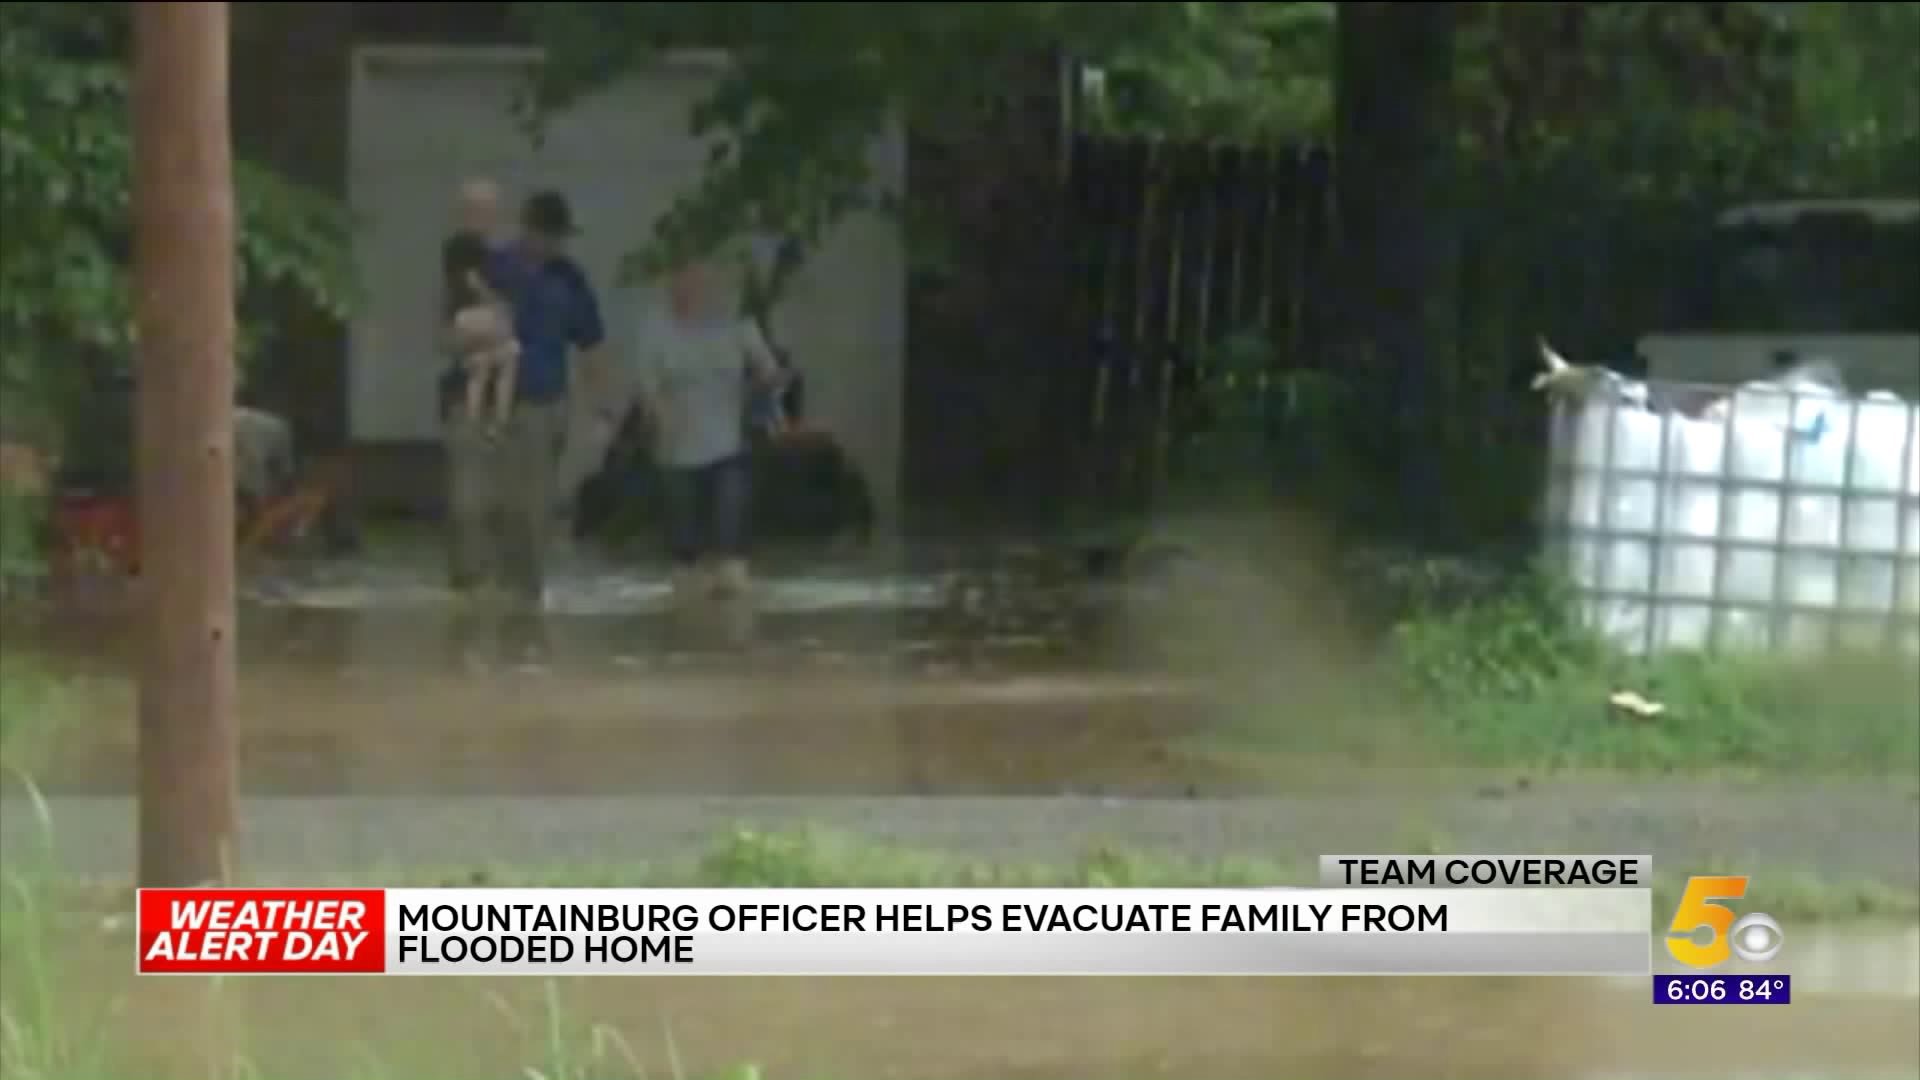 Mountainburg Officer Helps Family Evacuate from Flooded Home